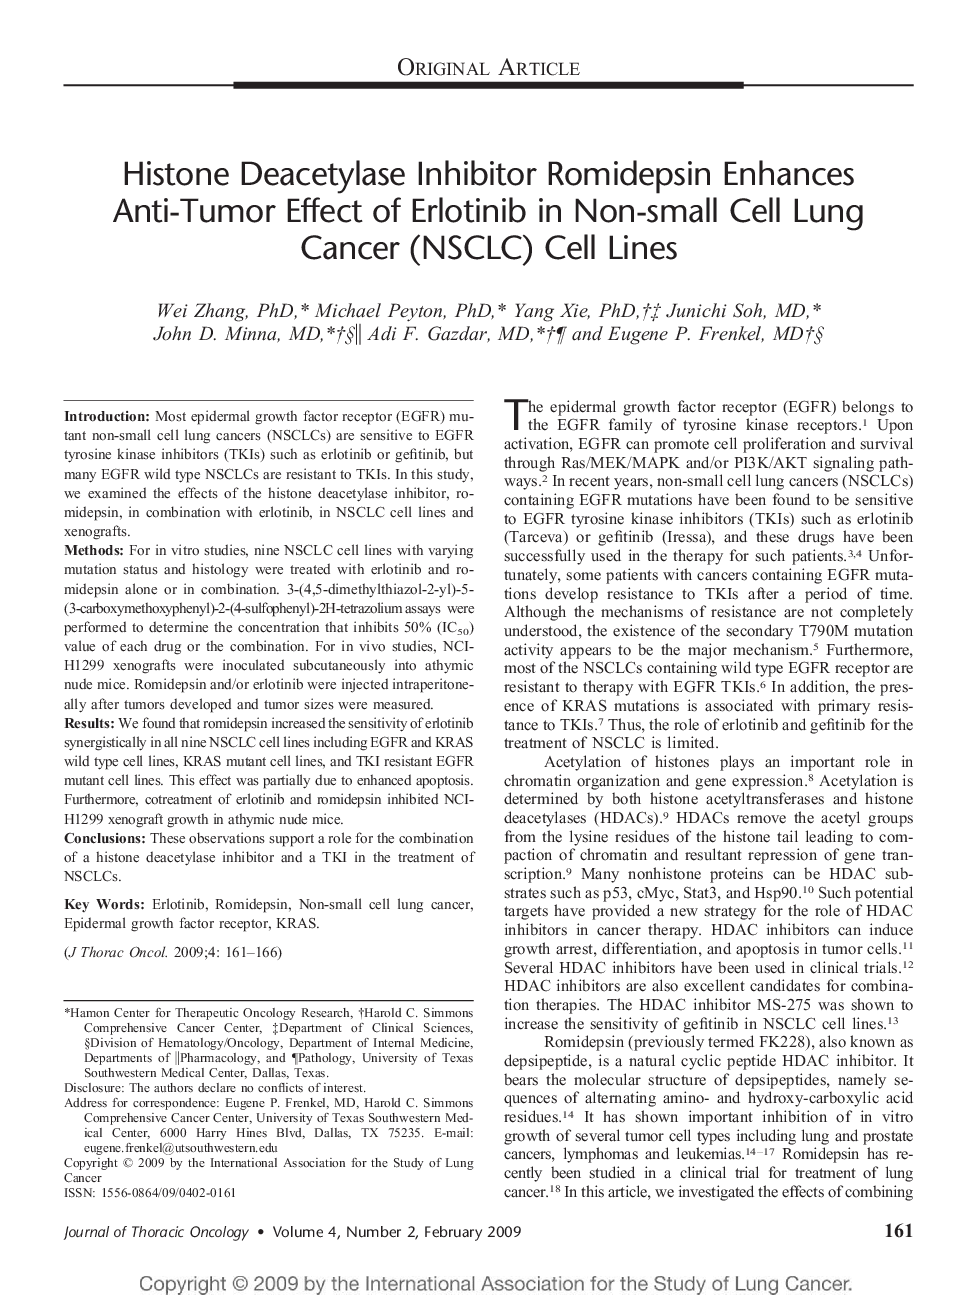 Histone Deacetylase Inhibitor Romidepsin Enhances Anti-Tumor Effect of Erlotinib in Non-small Cell Lung Cancer (NSCLC) Cell Lines